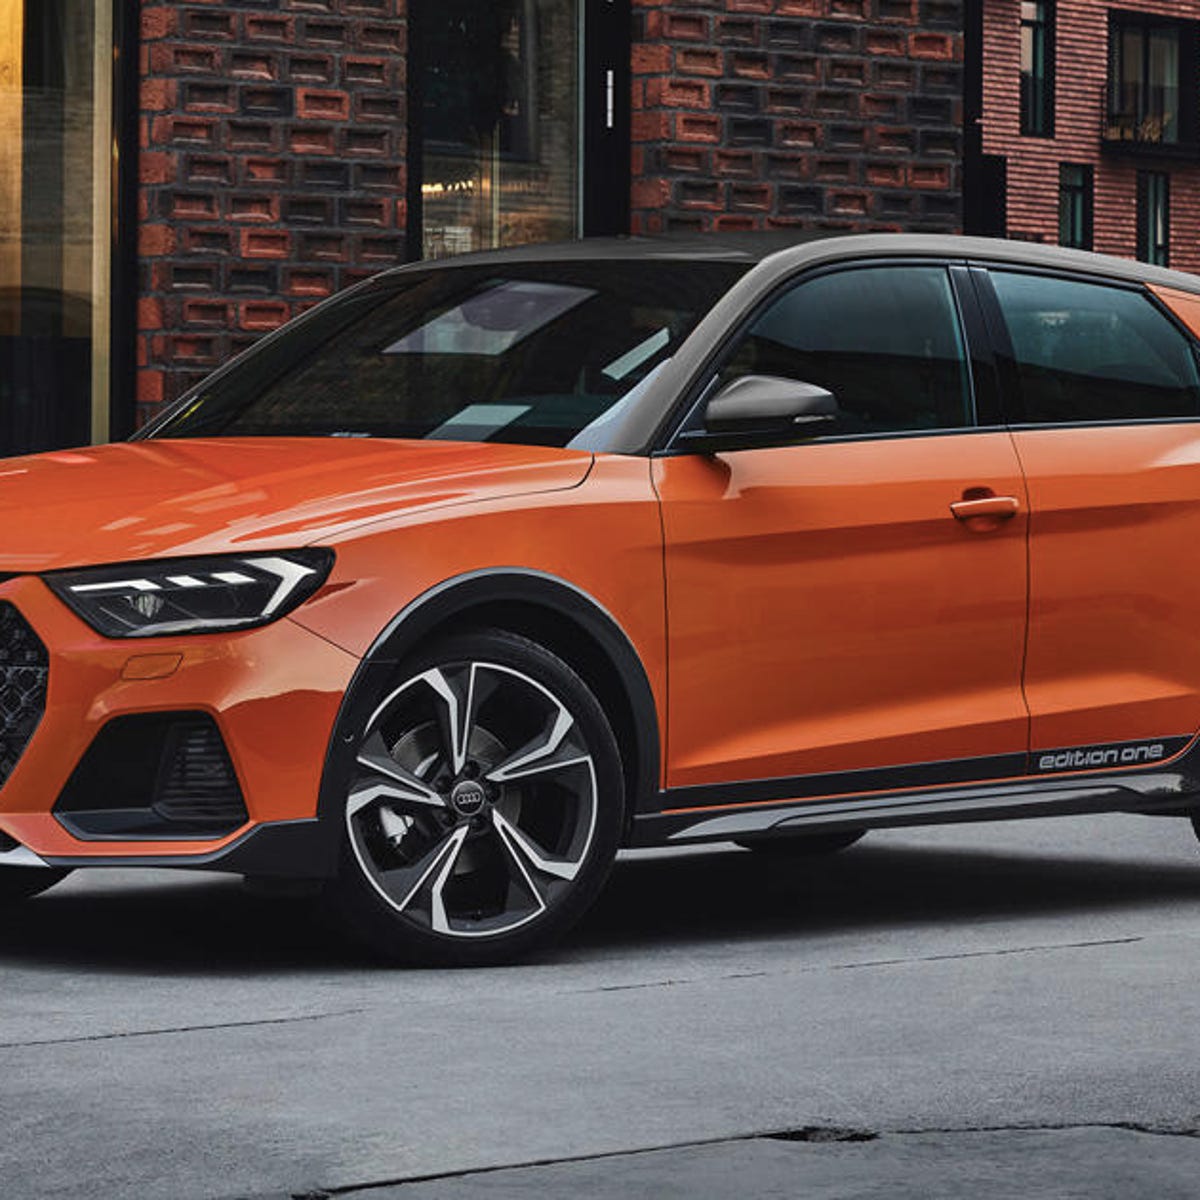 Audi A1 Citycarver adds lift, but it's more about style - CNET